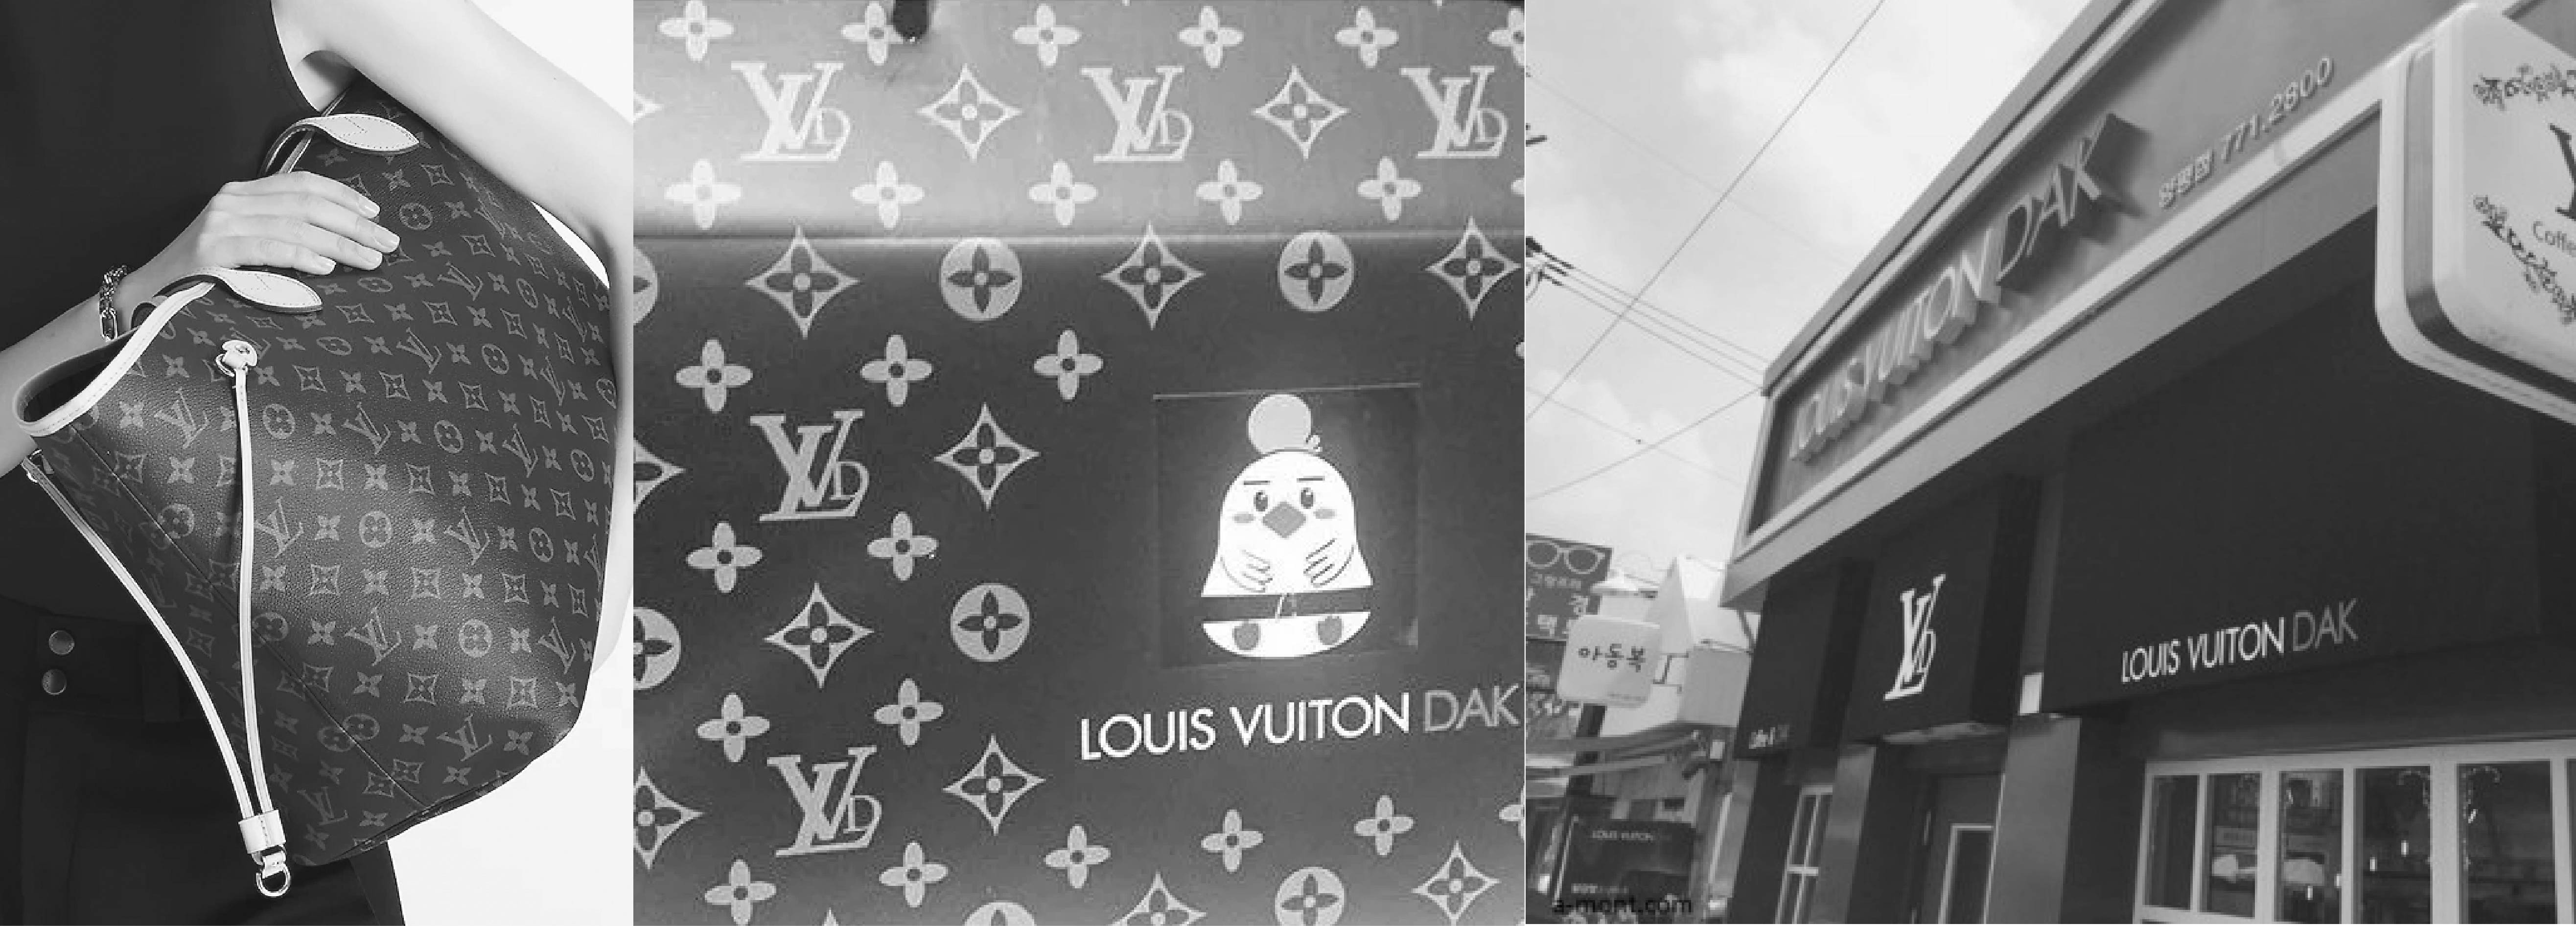 From Handbags to Hot Wings: Louis Vuitton's Battle  Over Brand Identity